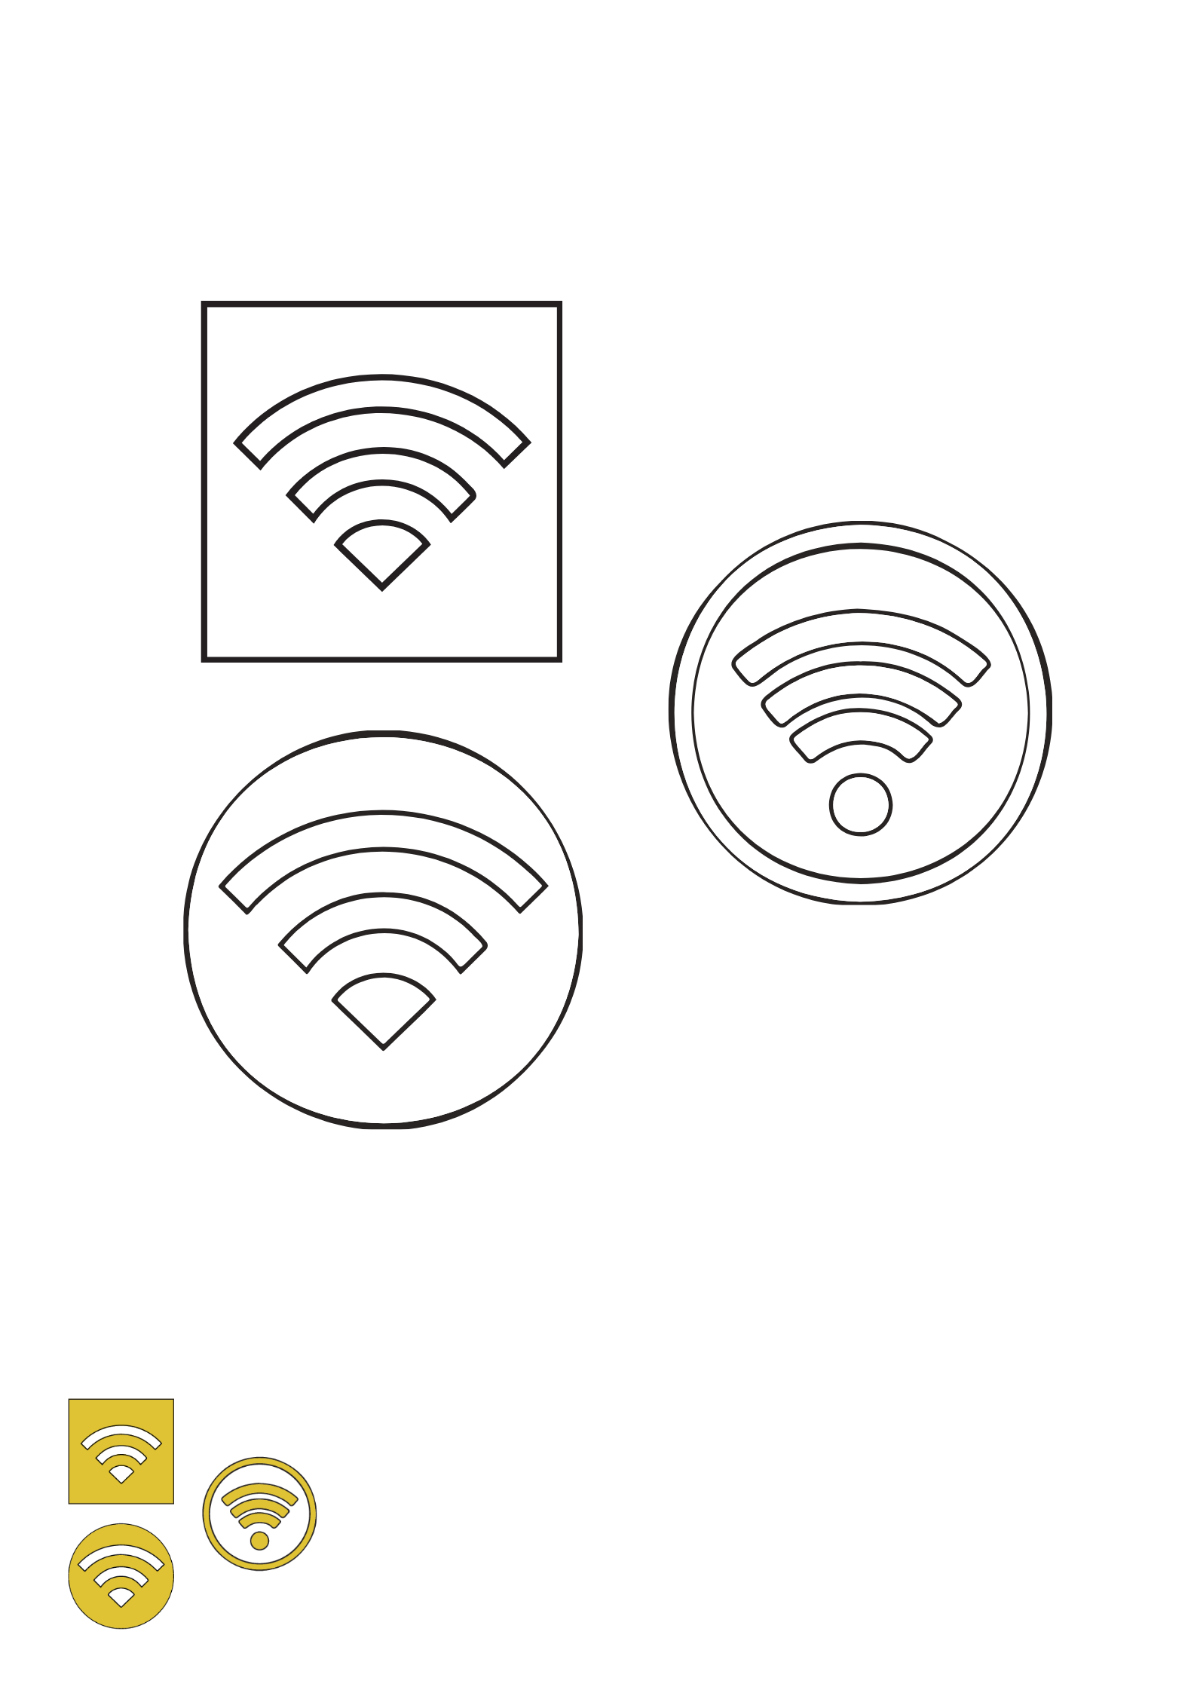 Gold Wifi coloring page Template